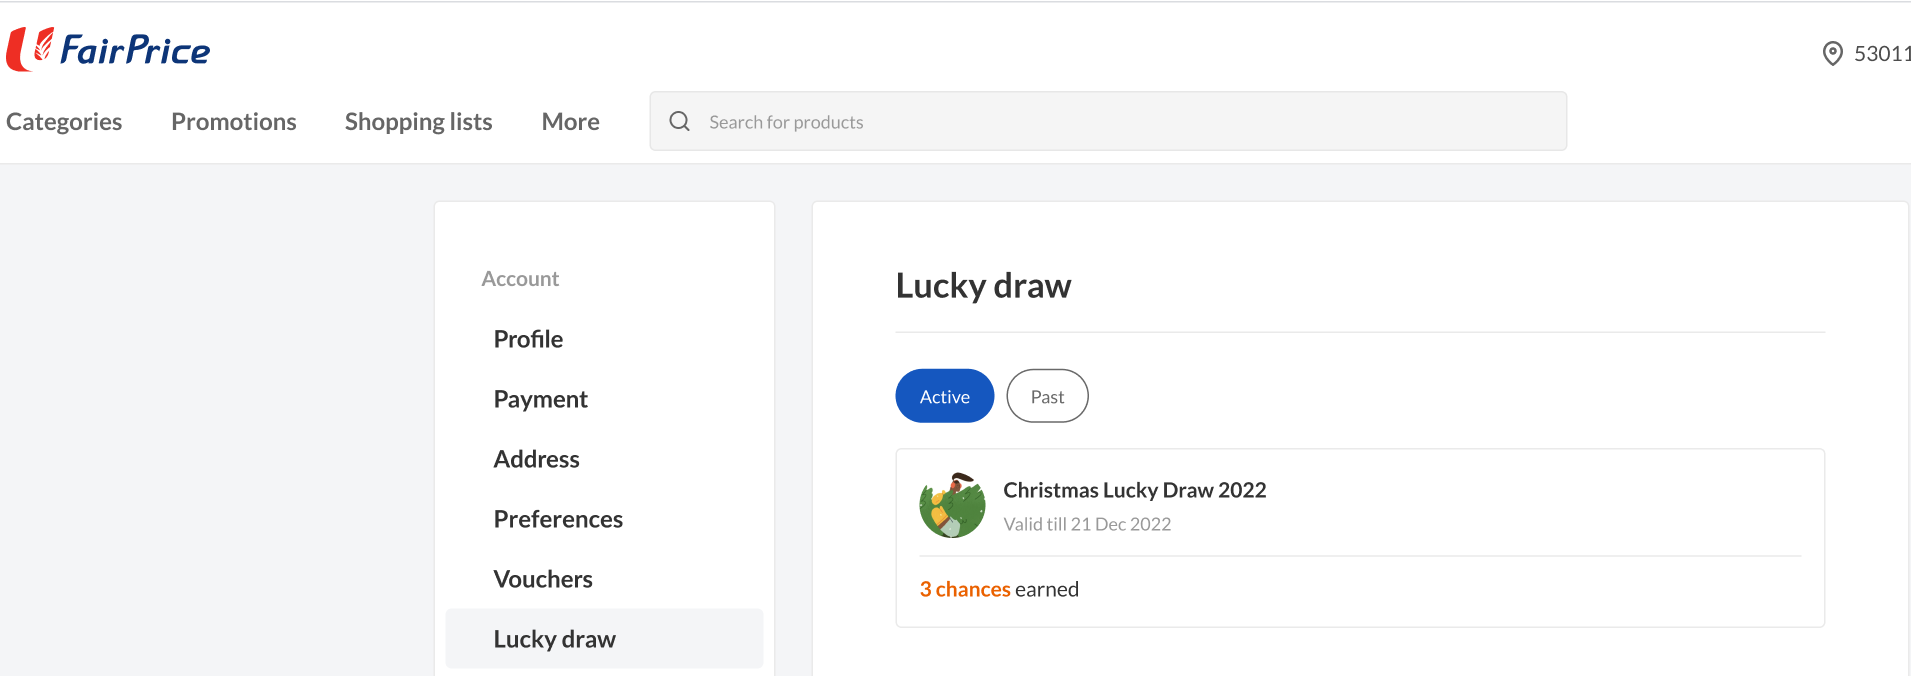 2-Luckydraw-active__web__copy.png